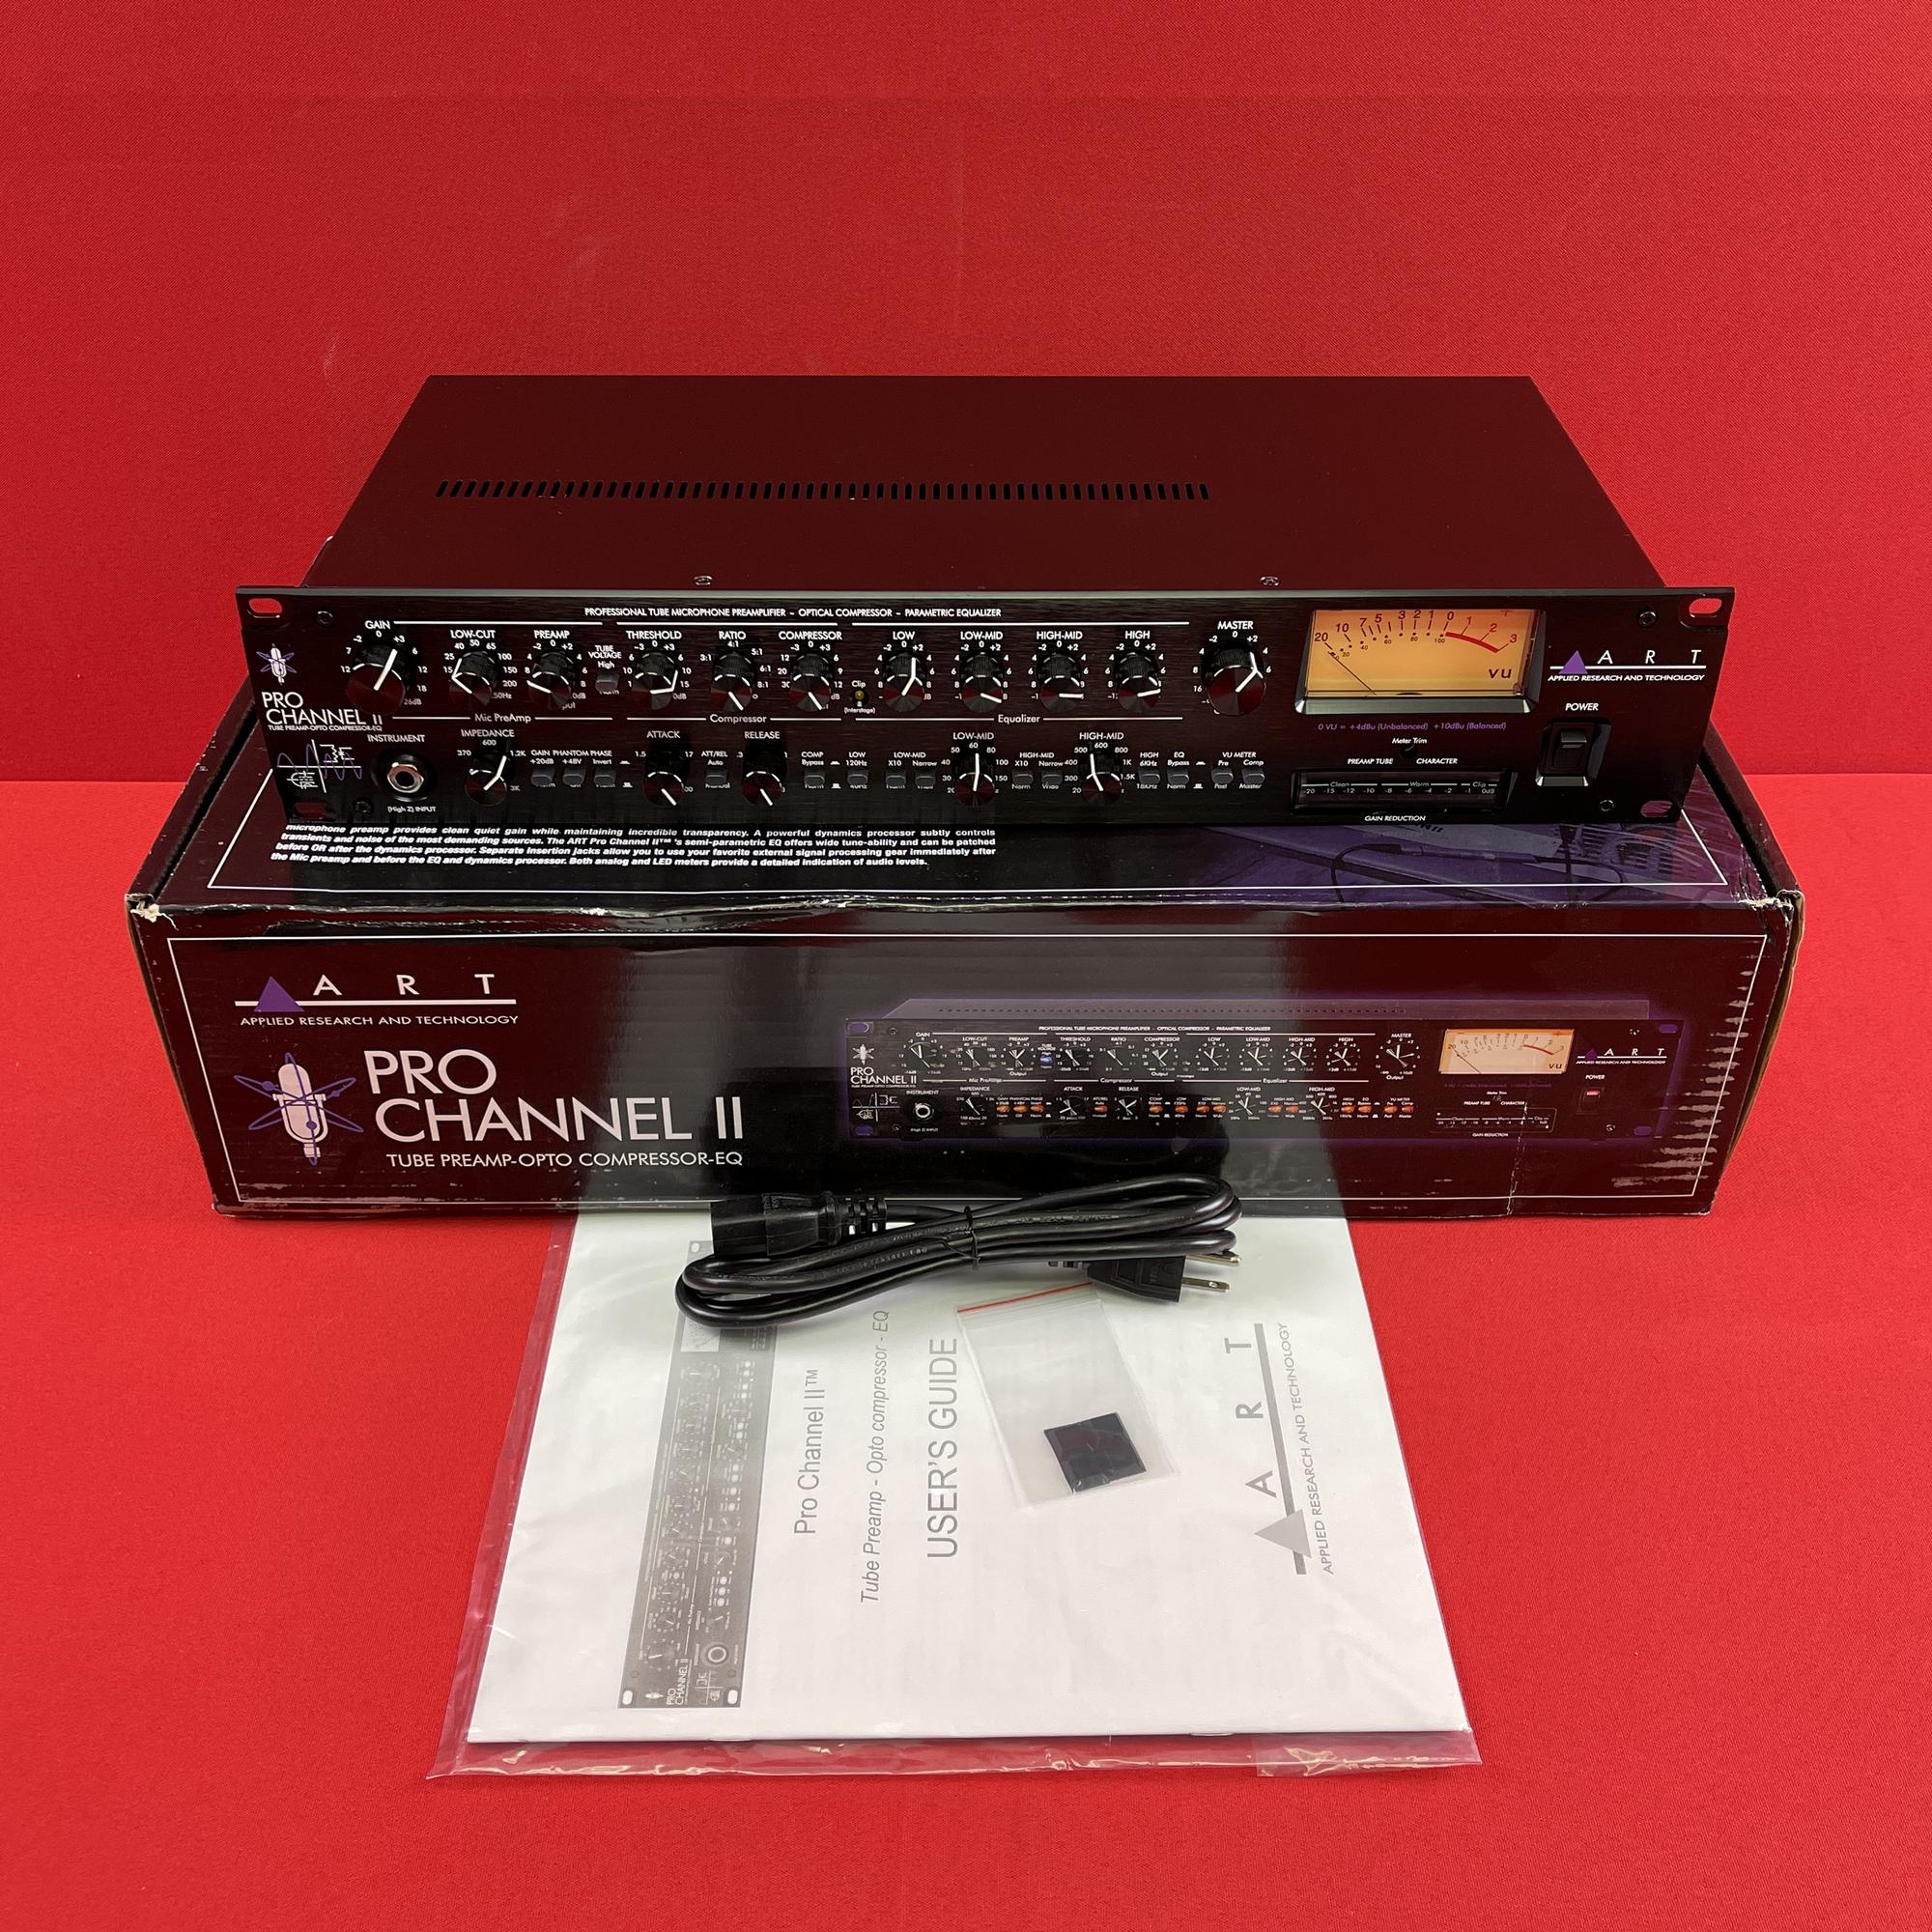 [USED] ART Pro Channel II Microphone Preamp/Compressor/EQ Professional Tube Based Selectable VU Metering